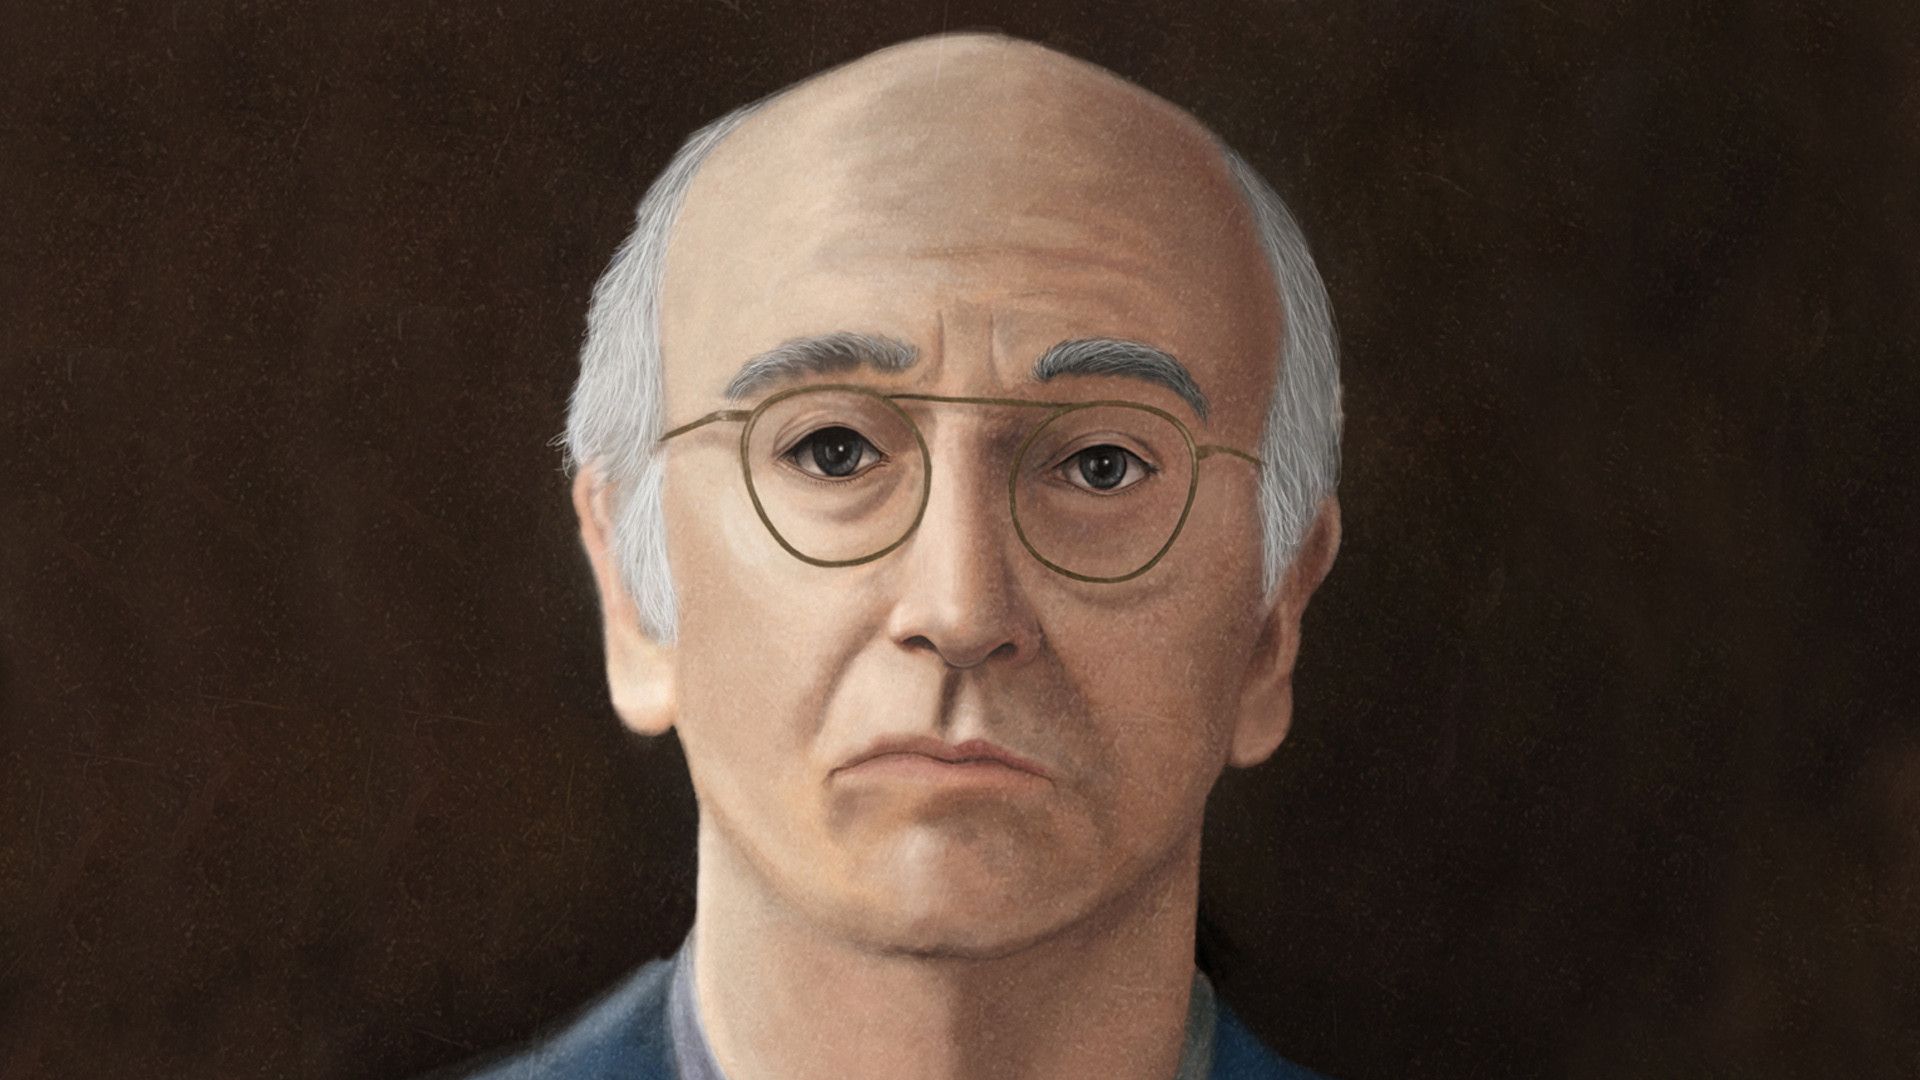 Curb Your Enthusiasm background